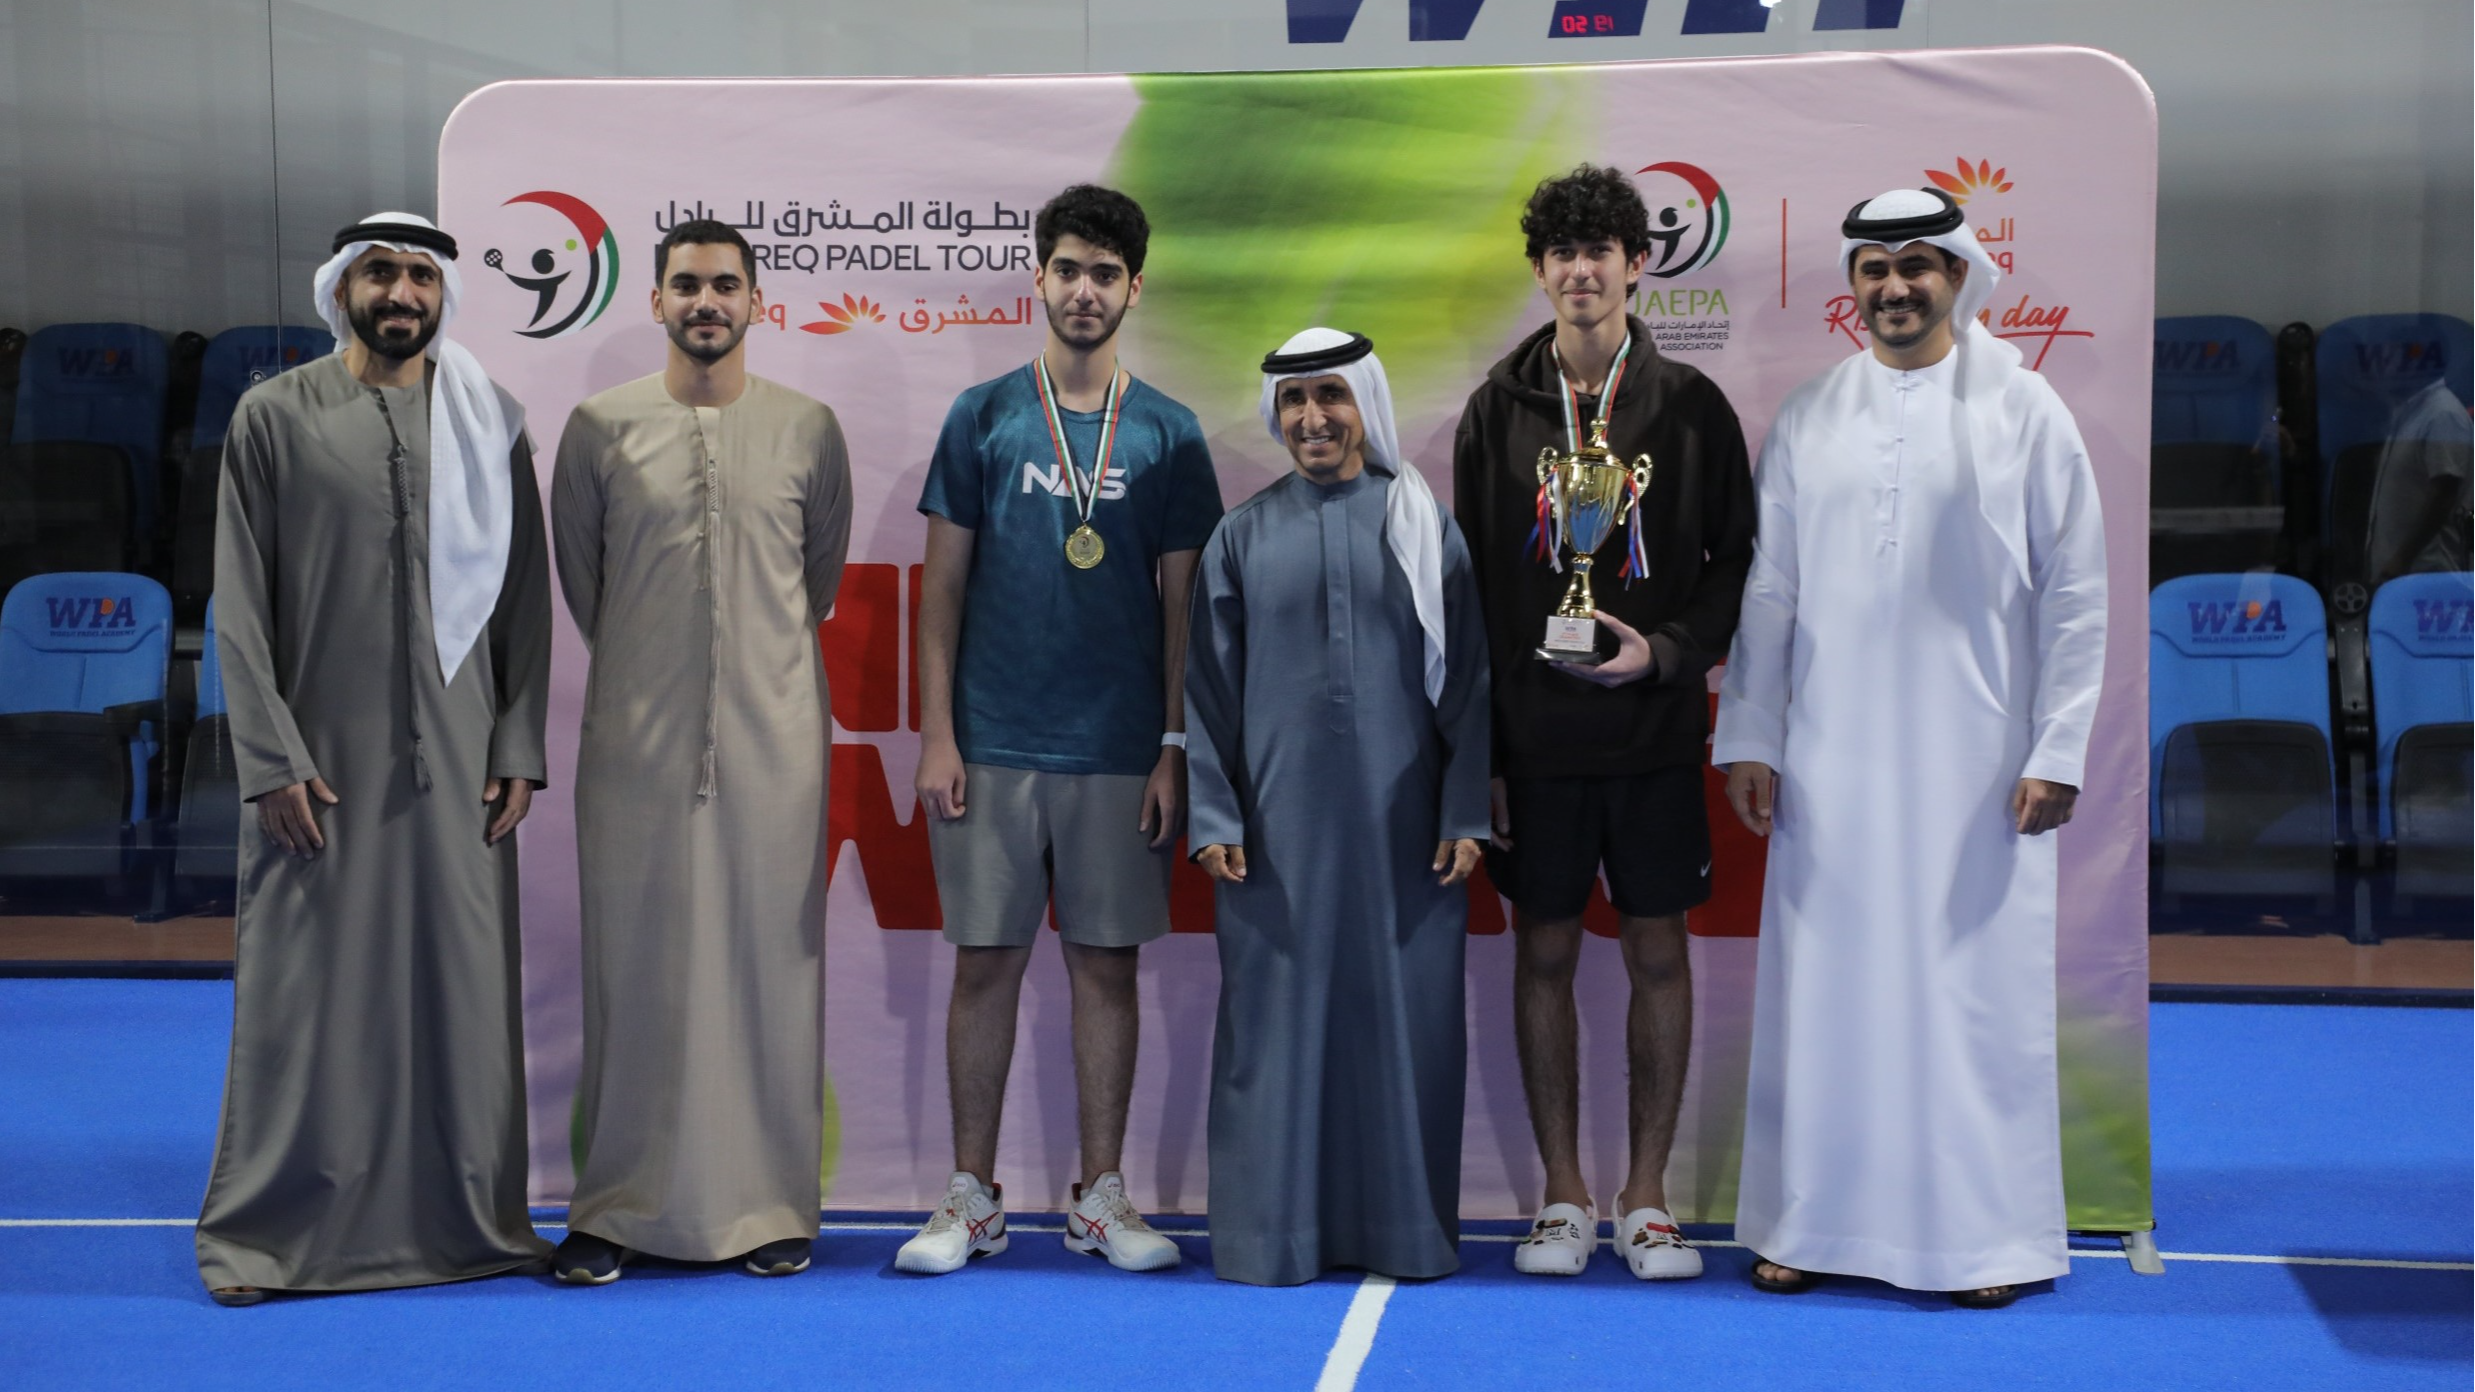 https://adgully.me/post/1536/uaepa-reveals-the-opening-event-of-this-years-inaugural-mashreq-padel-tour